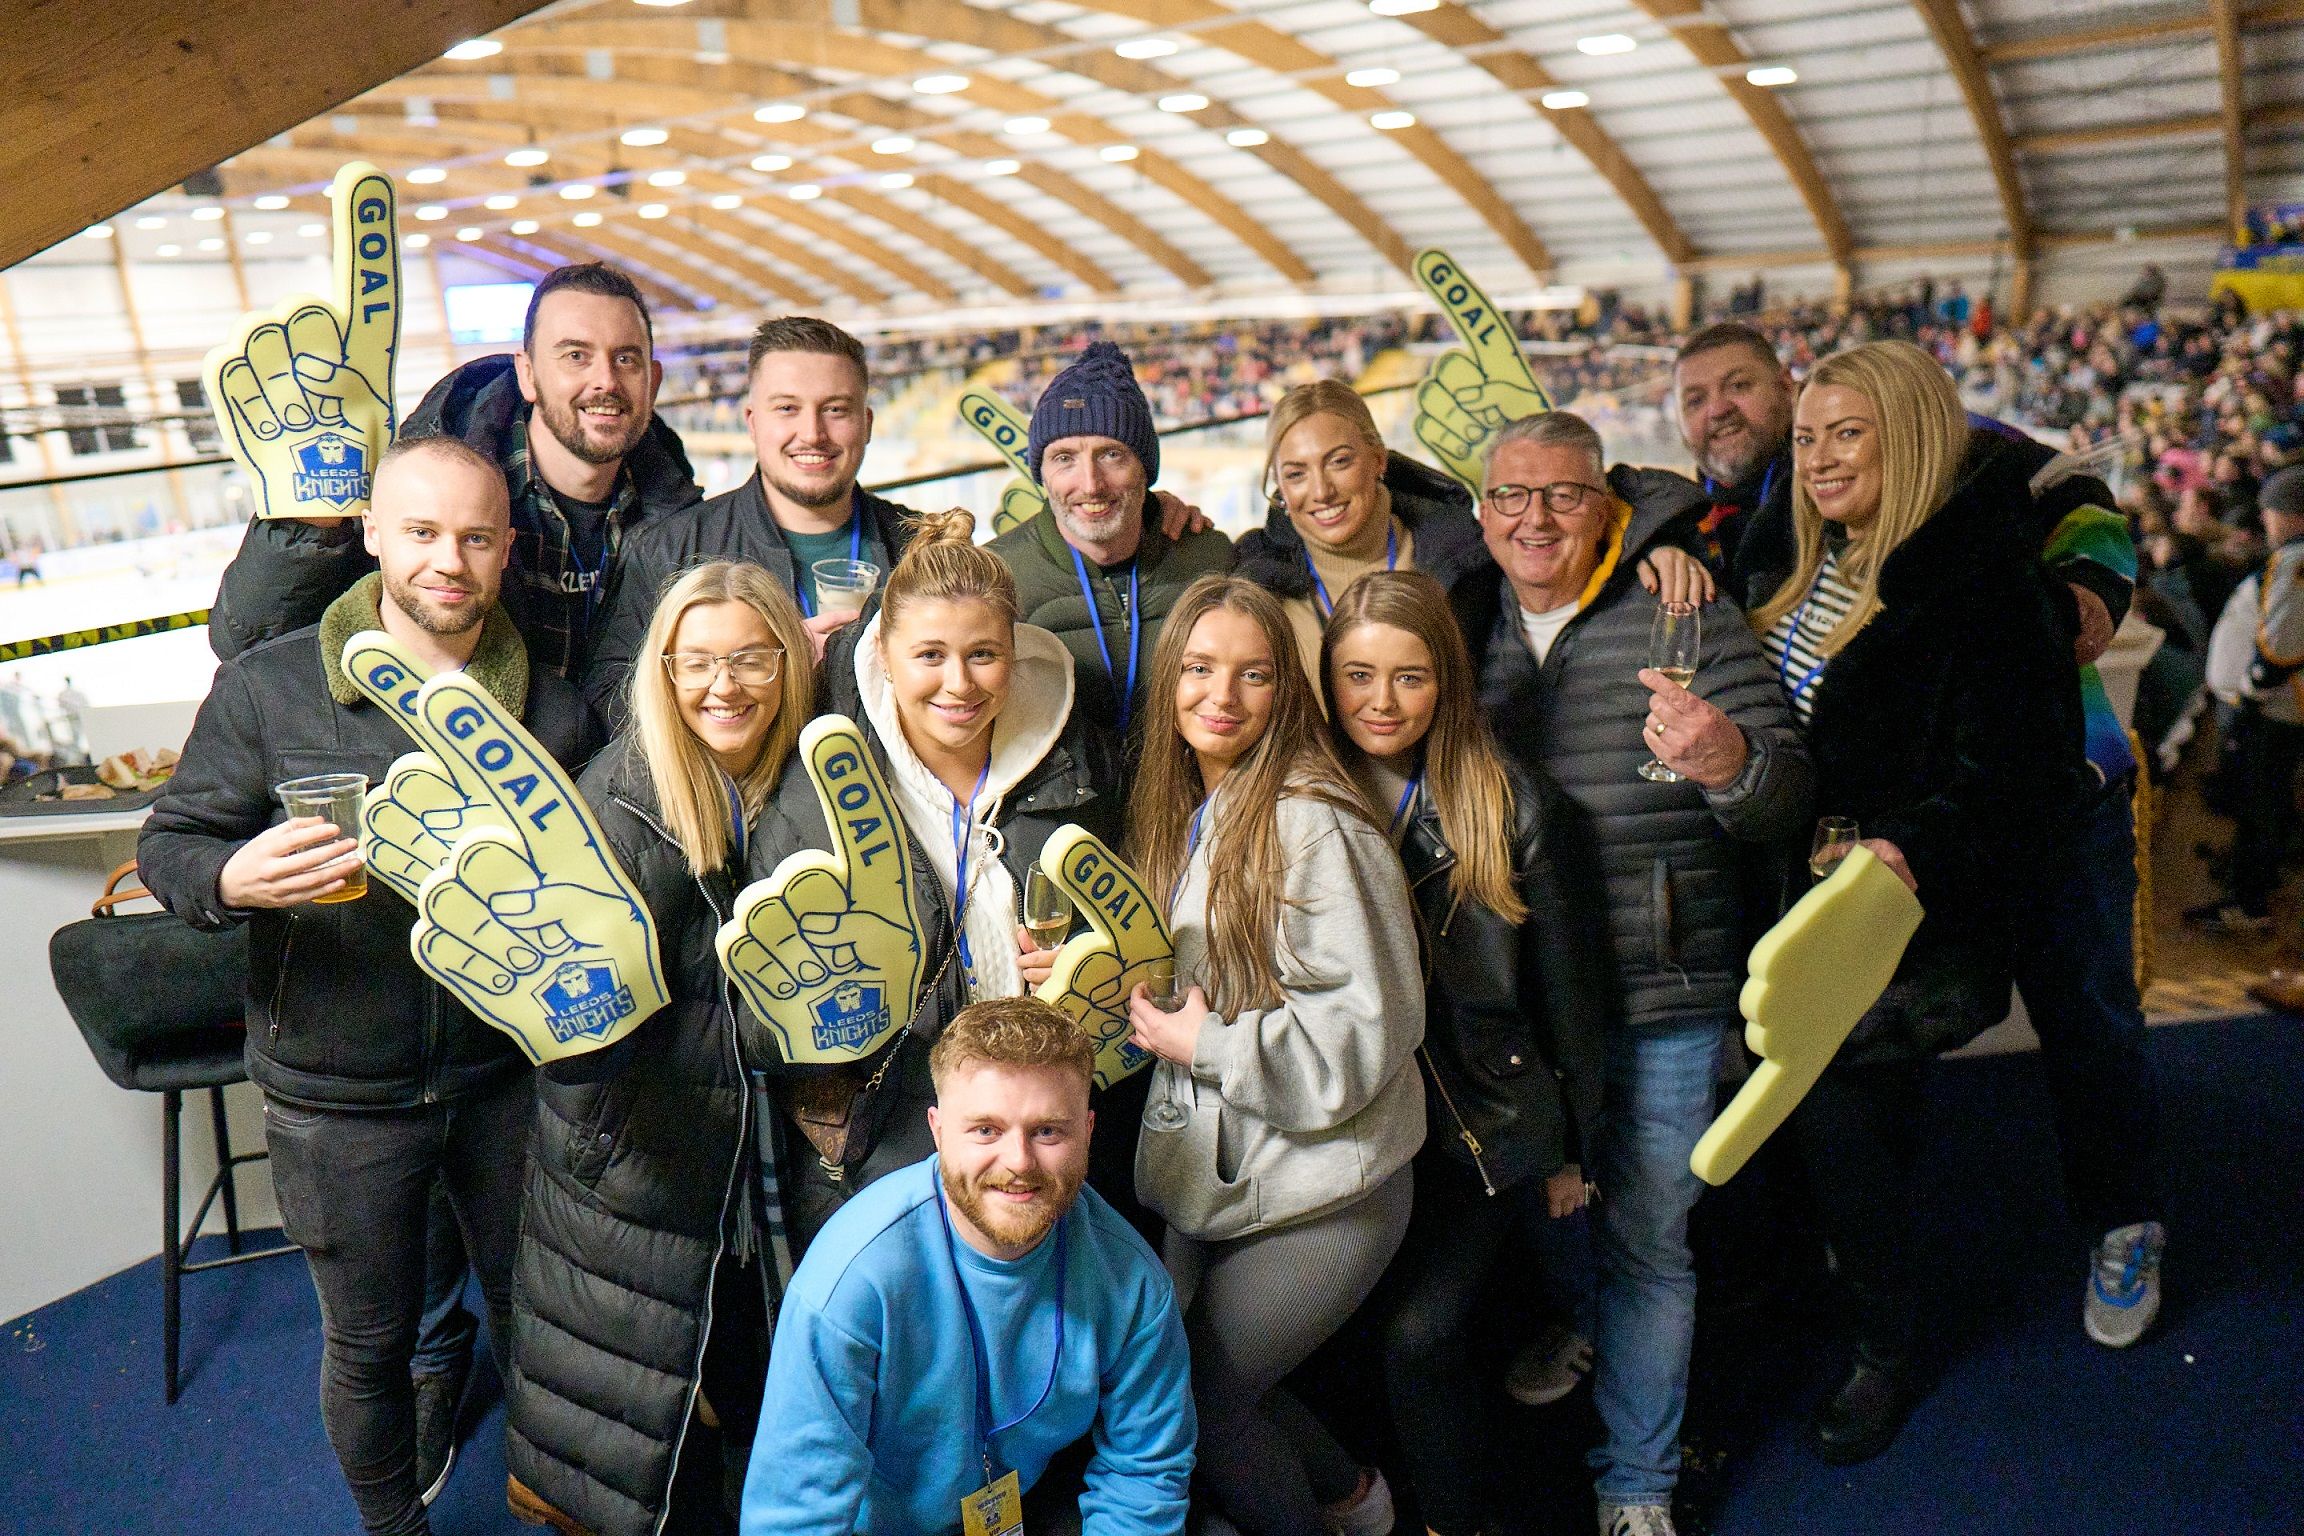 The Morley Glass team celebrating their 2-year sponsorship deal with Leeds Knights.